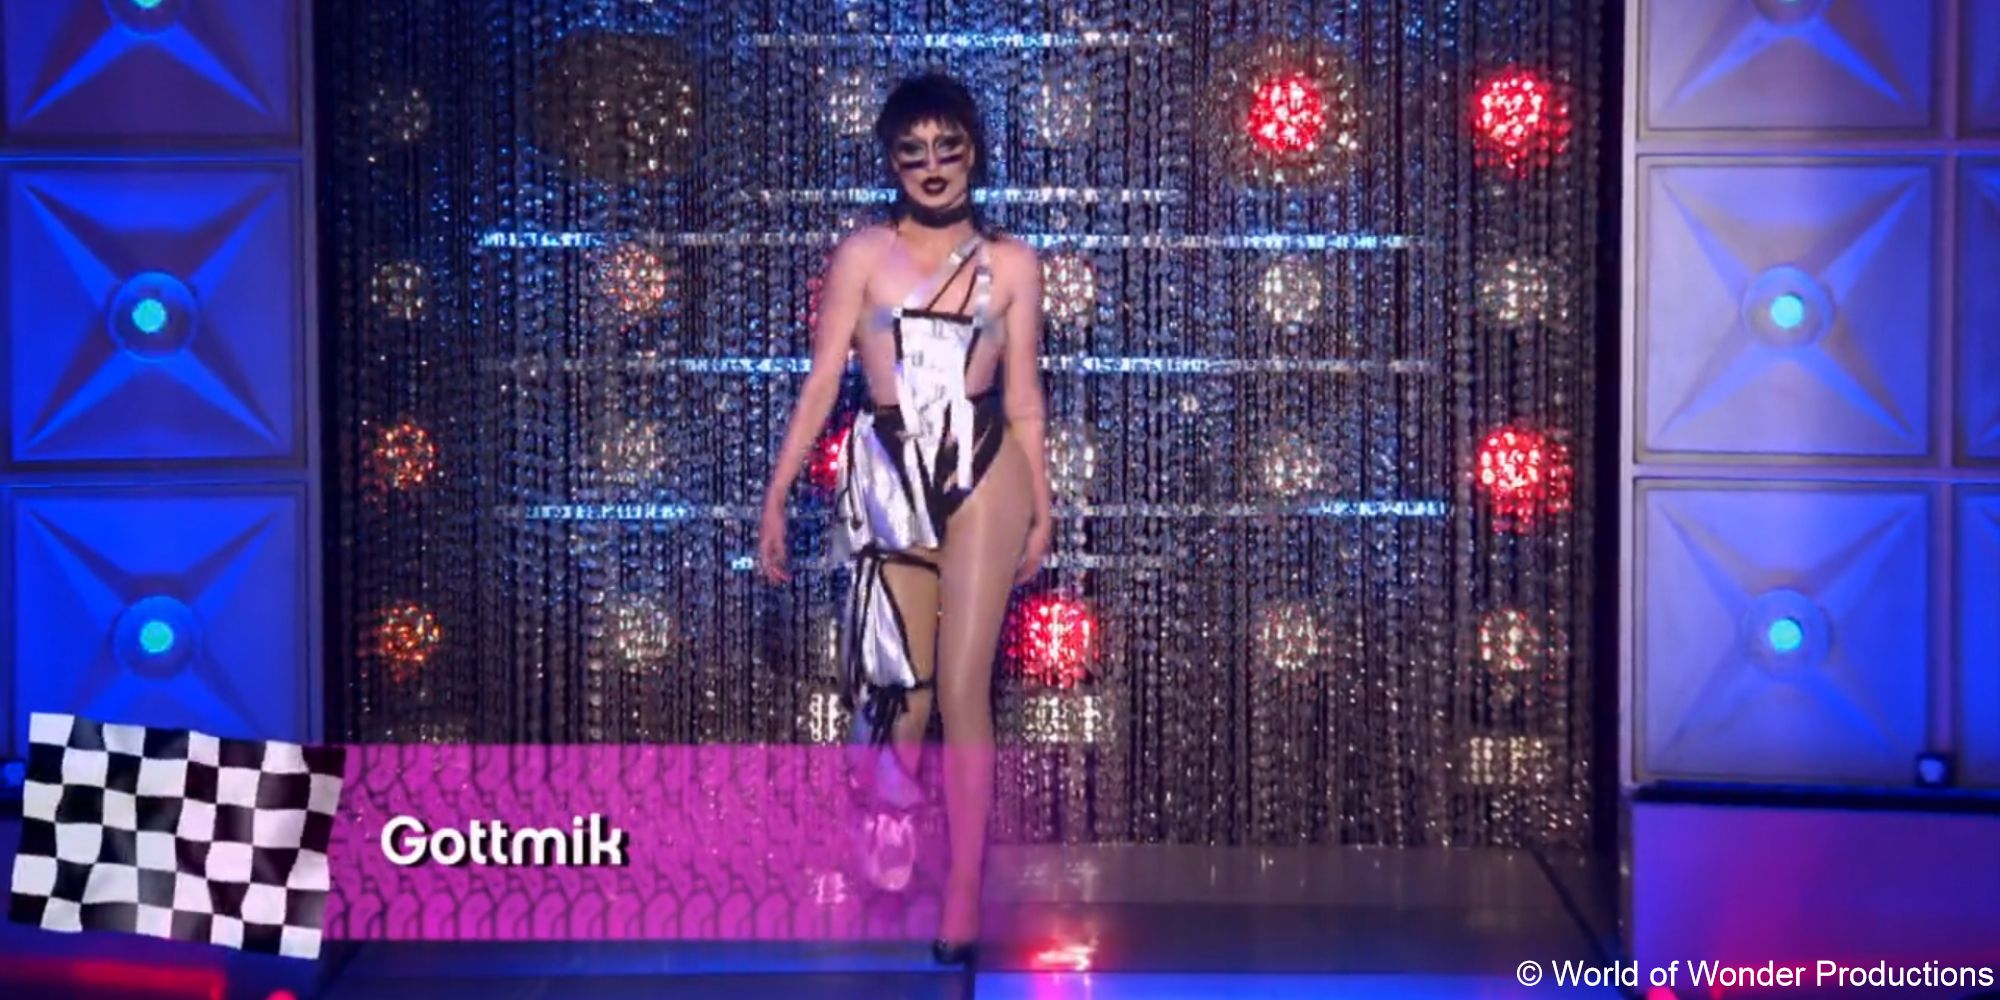 A still of drag queen Gottmik wearing a strappy black and silver garment with grey sunglasses